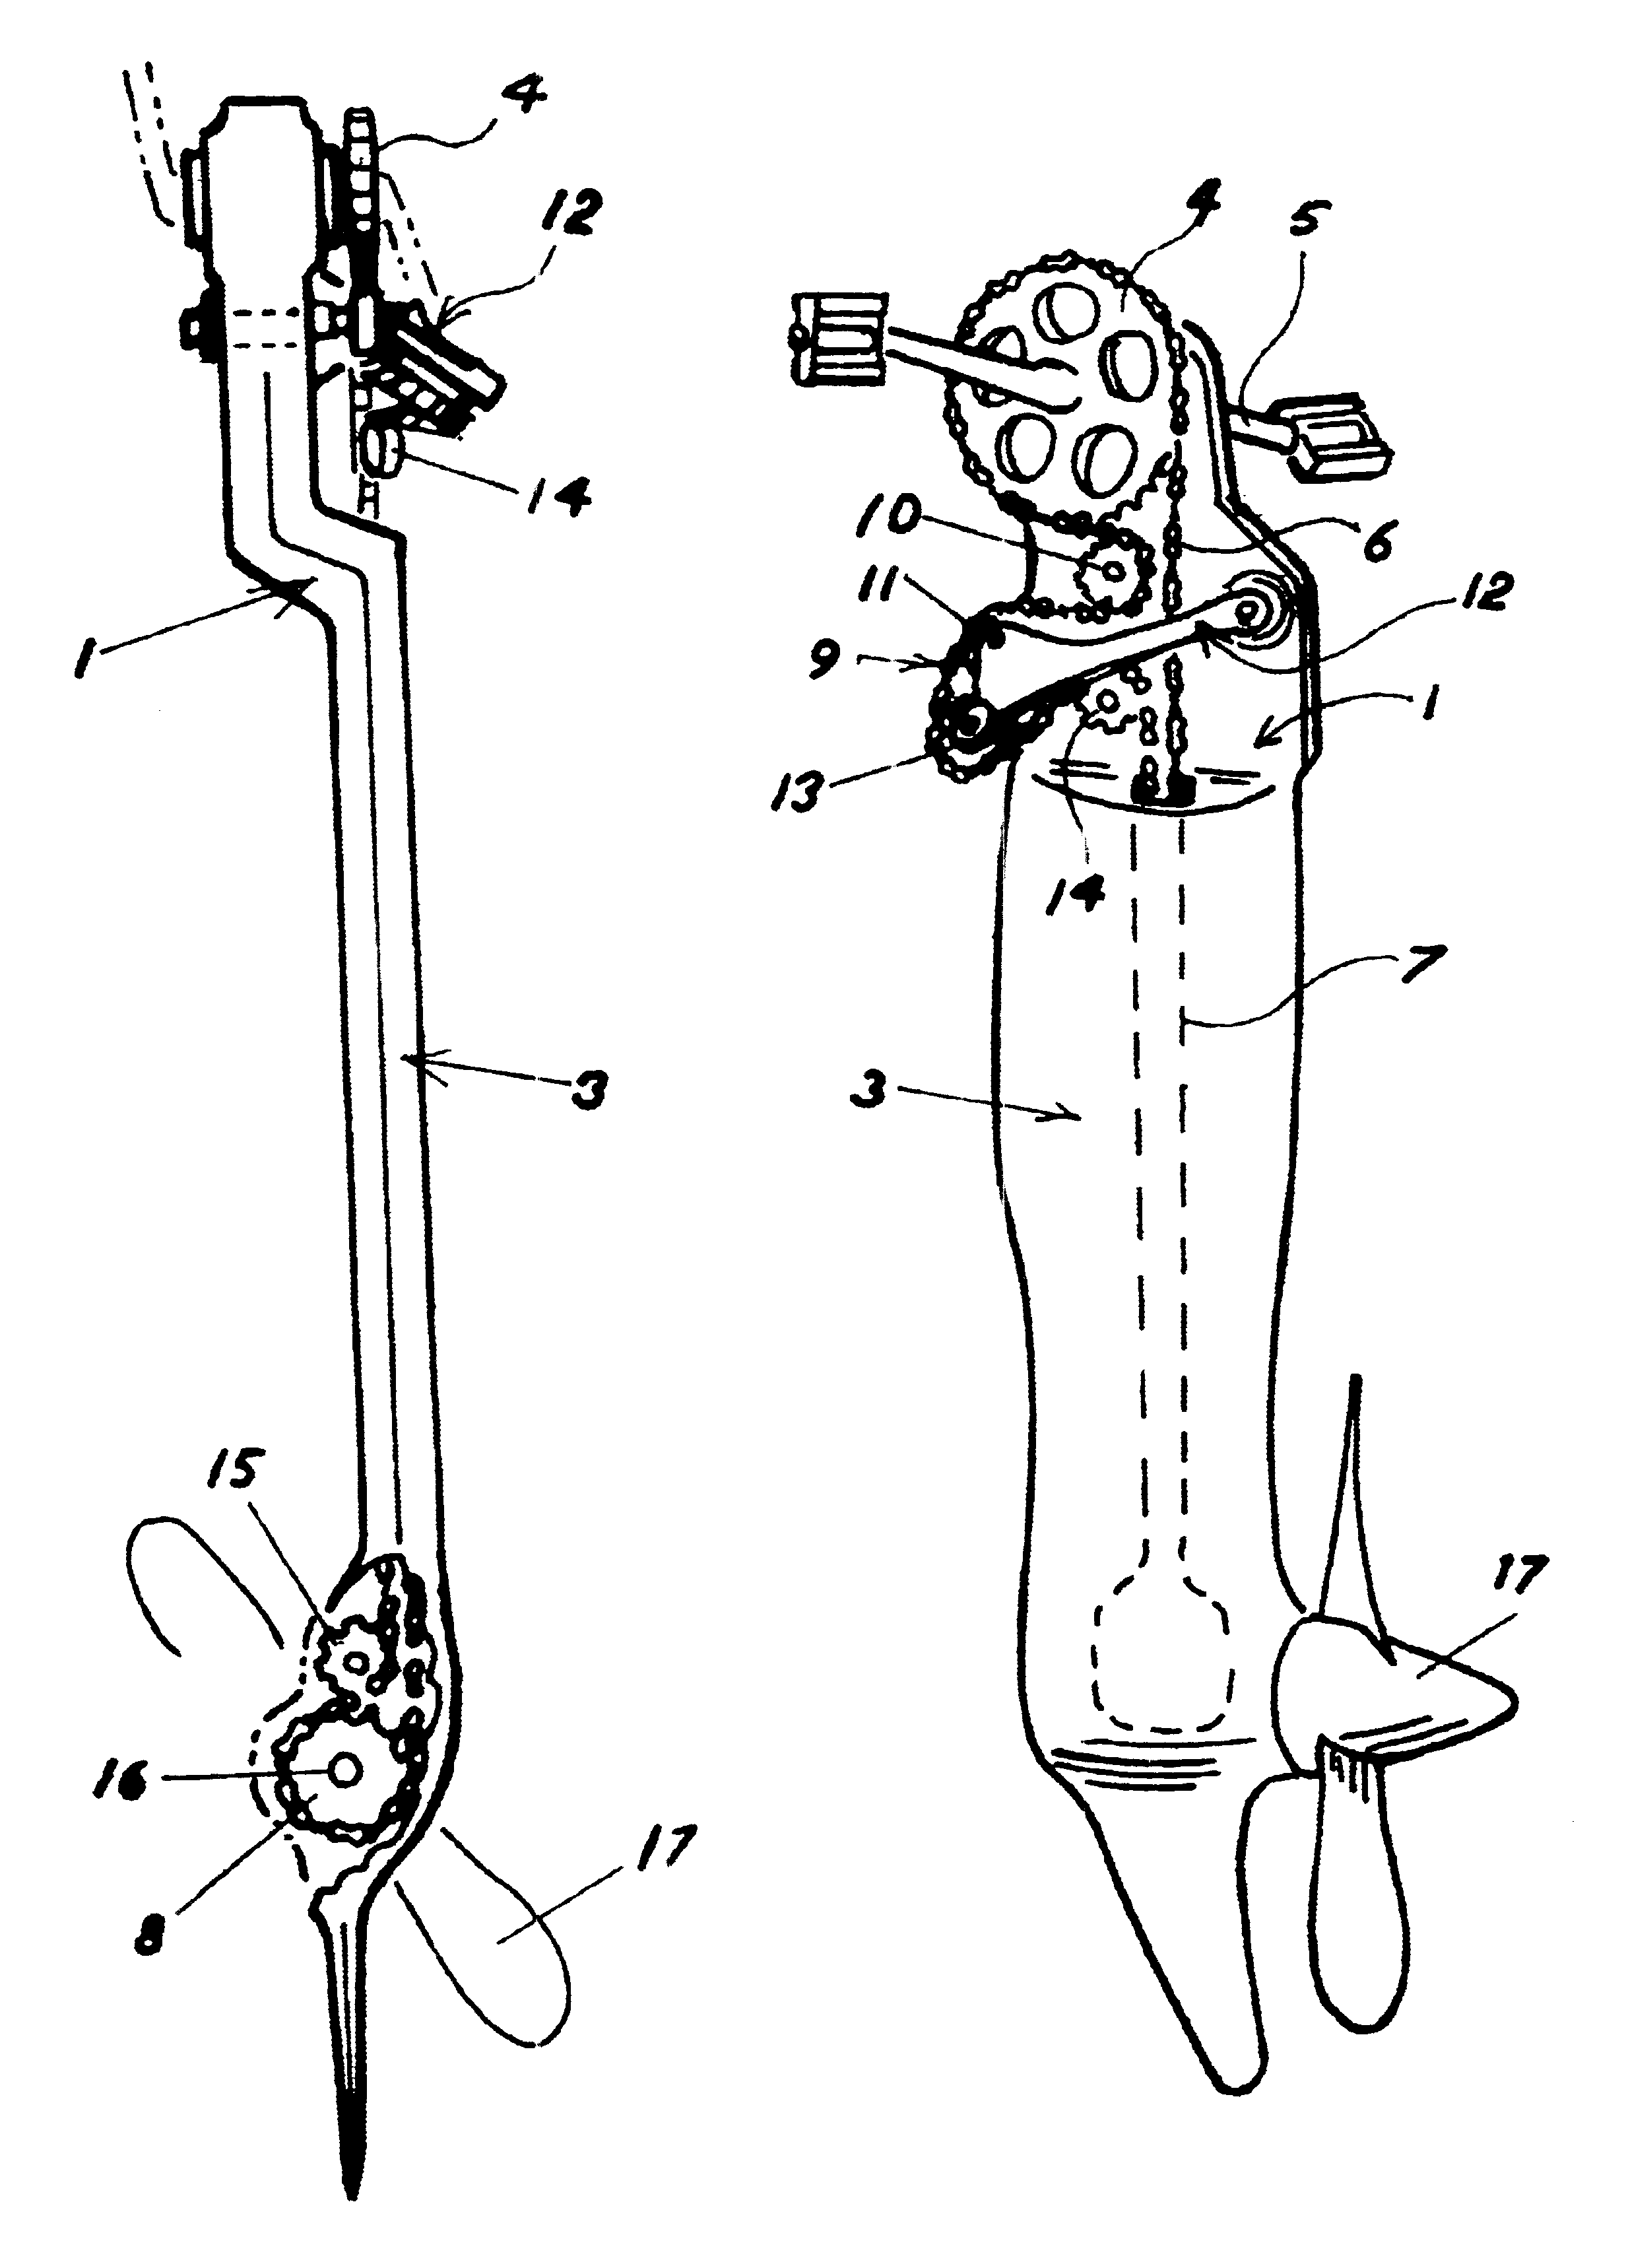 Self-tensioning pedal drive mechanism for a human powered boat